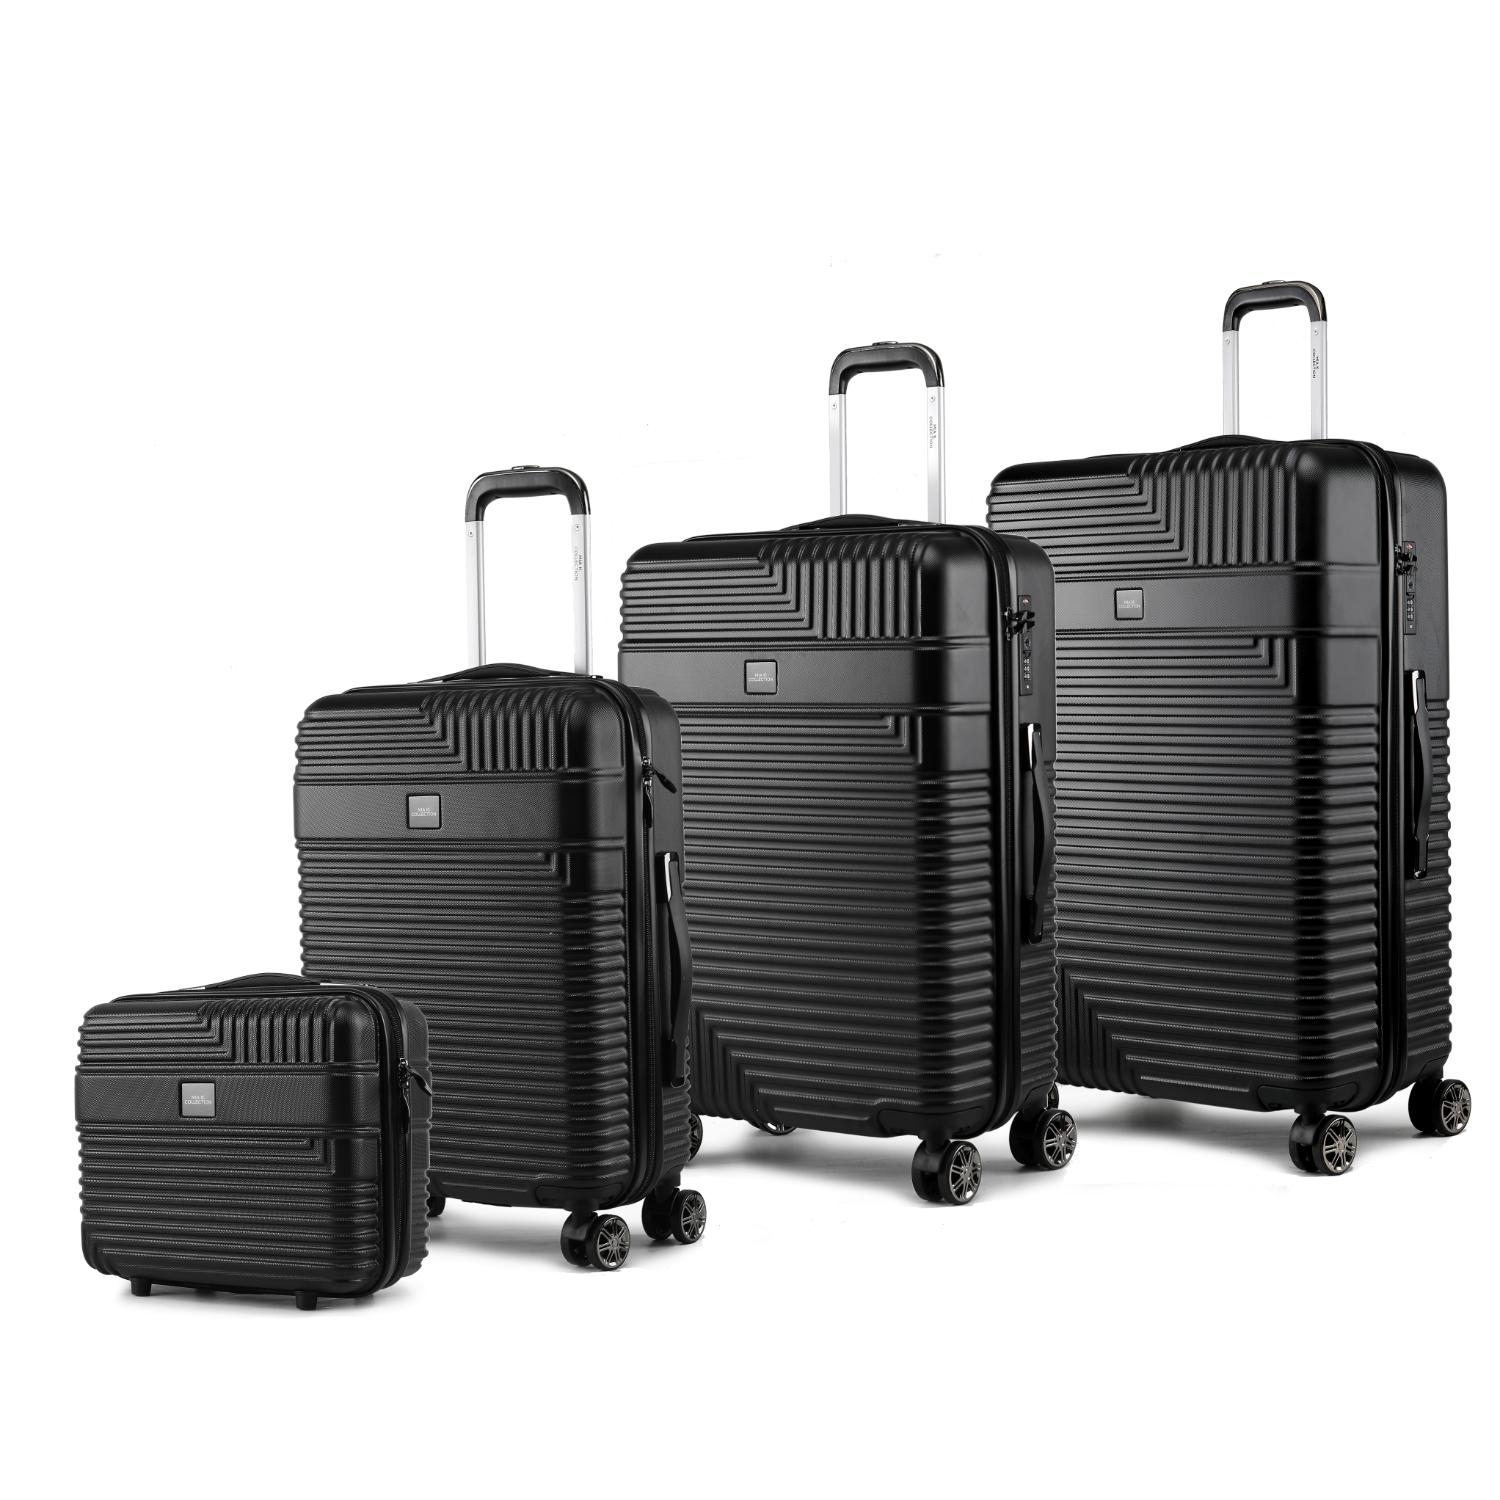 MKF Collection Mykonos Luggage Set- Extra Large Check-in, Large Check-in, Medium Carry-on, And Small Cosmetic Case 4 Pieces By Mia K - Black